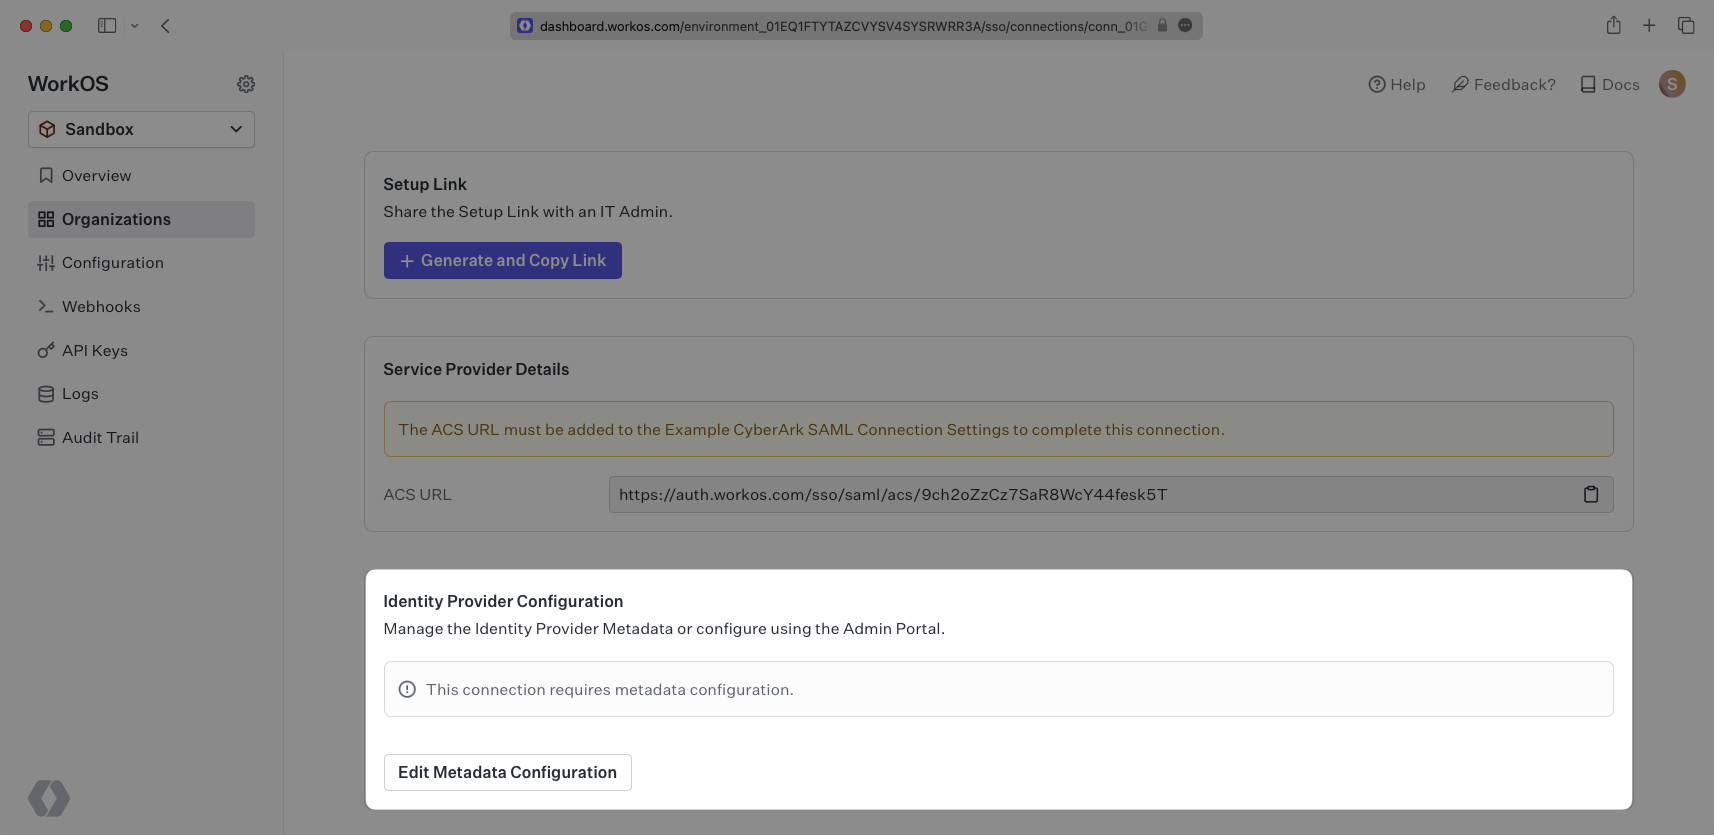 A screenshot showing where to select "Edit Metadata Configuration" in the "Identity Provider Configuration" in the WorkOS dashboard.